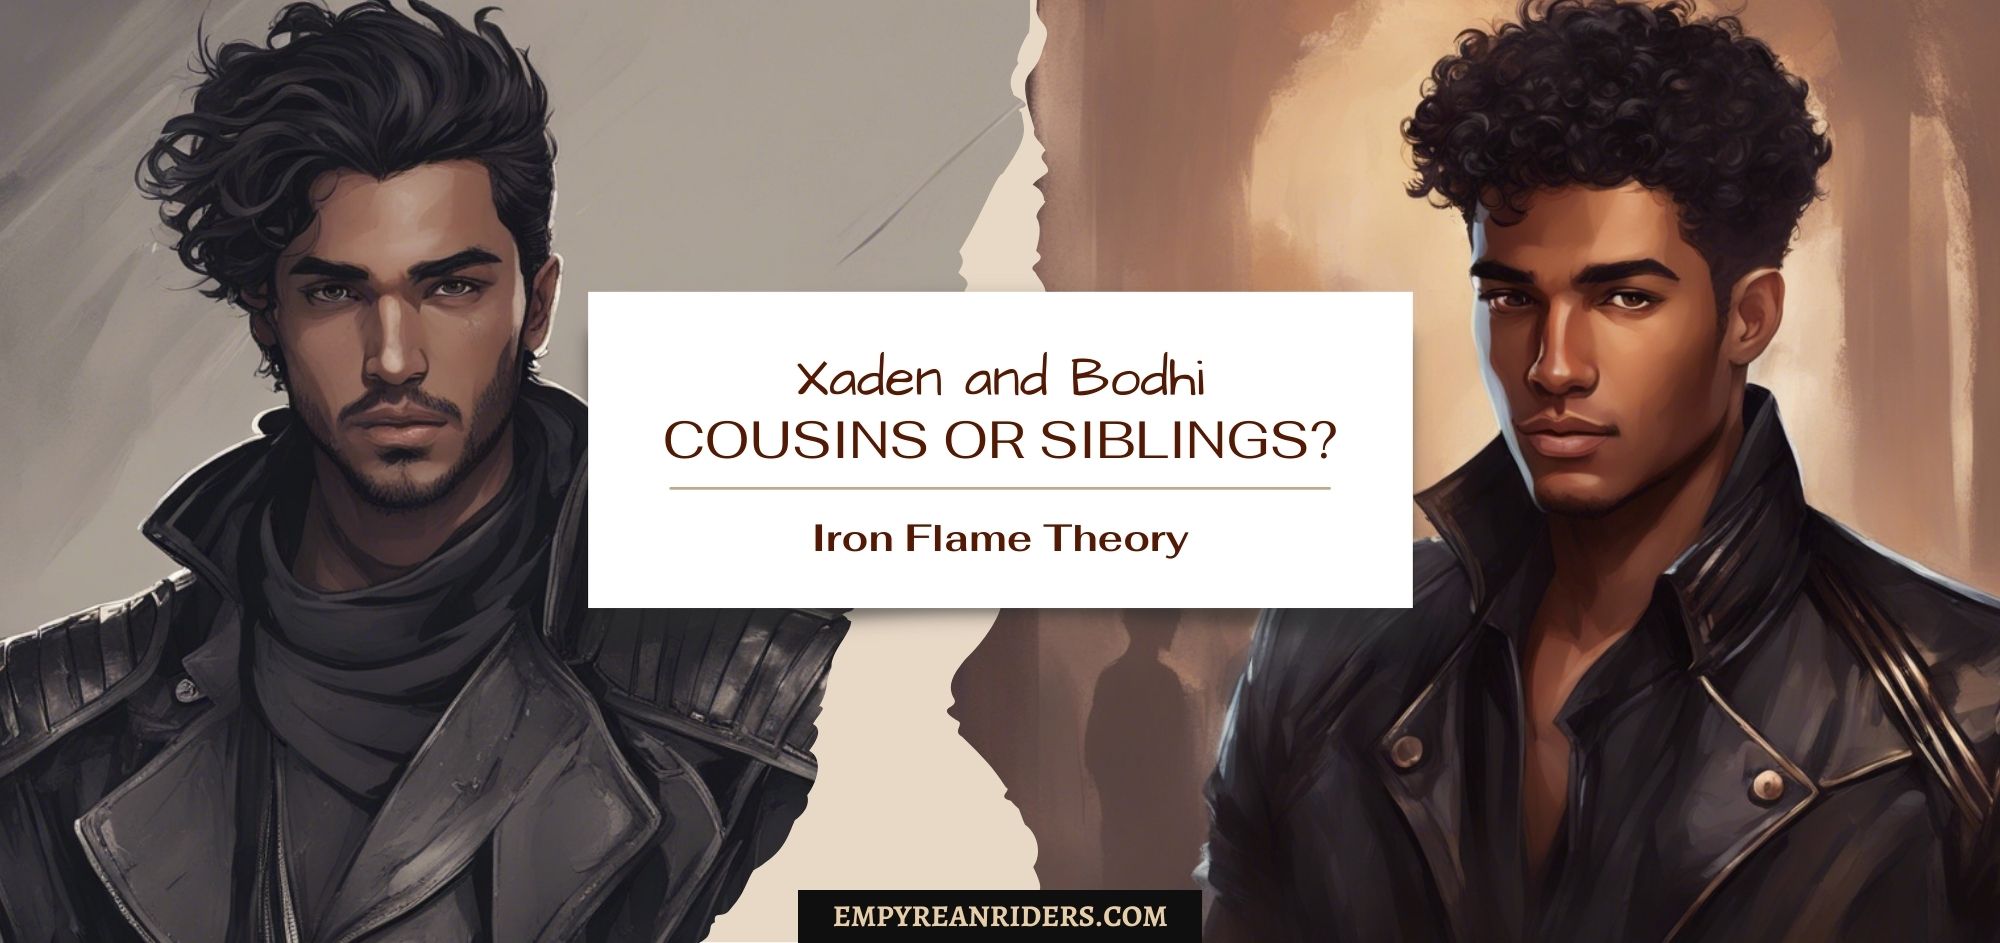 Iron Flame Theory: Bodhi is Xaden’s brother